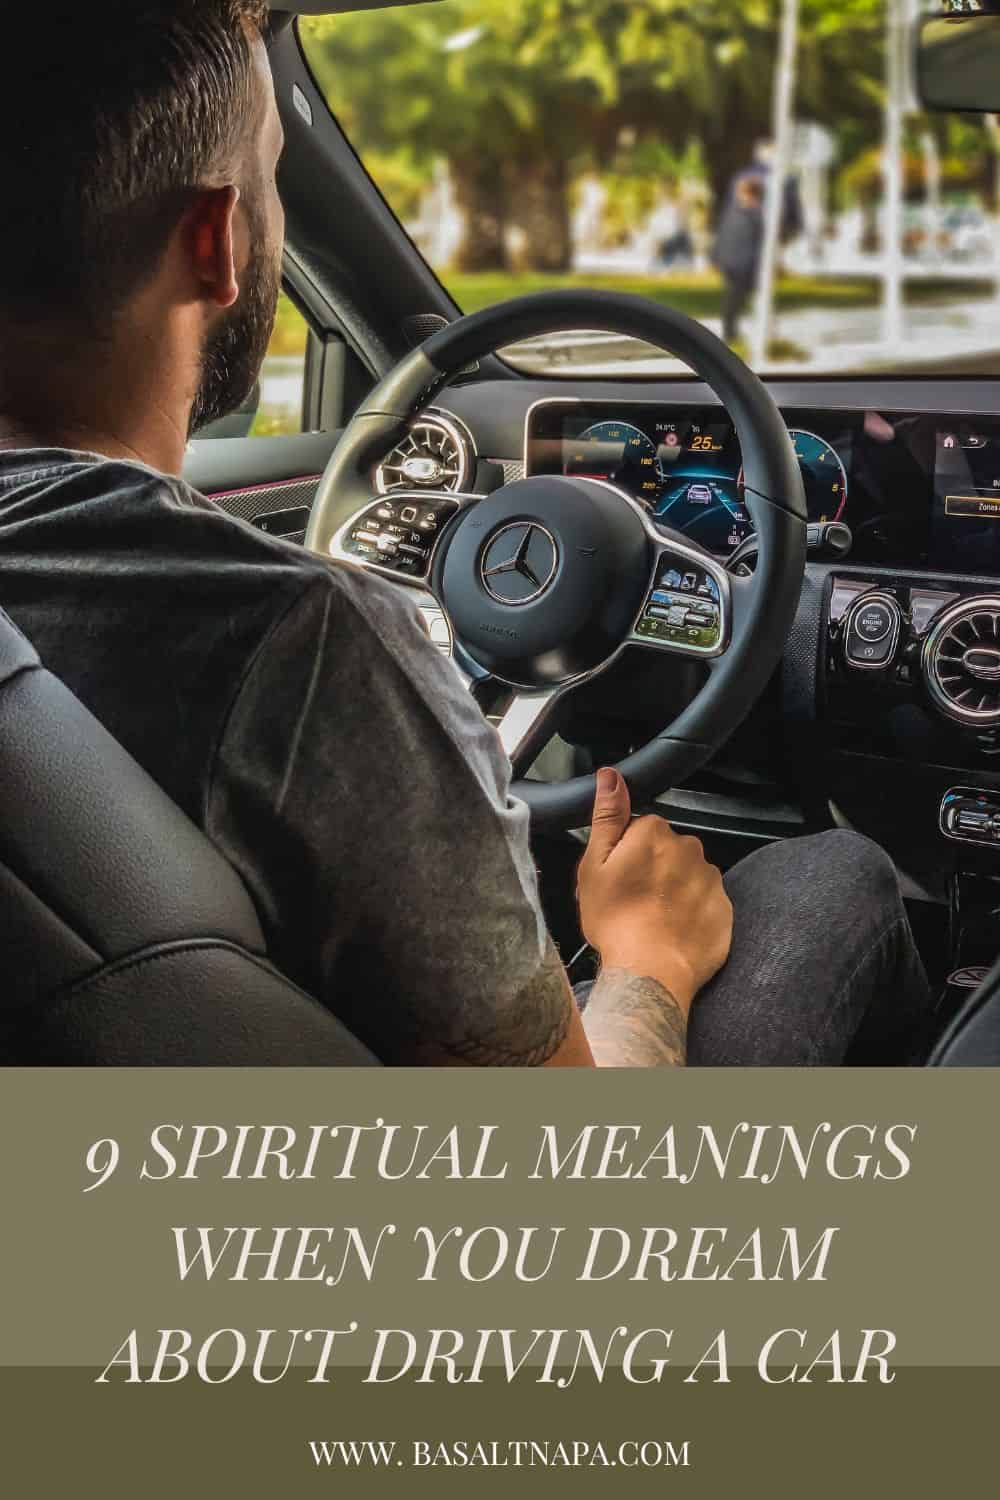 9 Spiritual Meanings When You Dream About Driving A Car